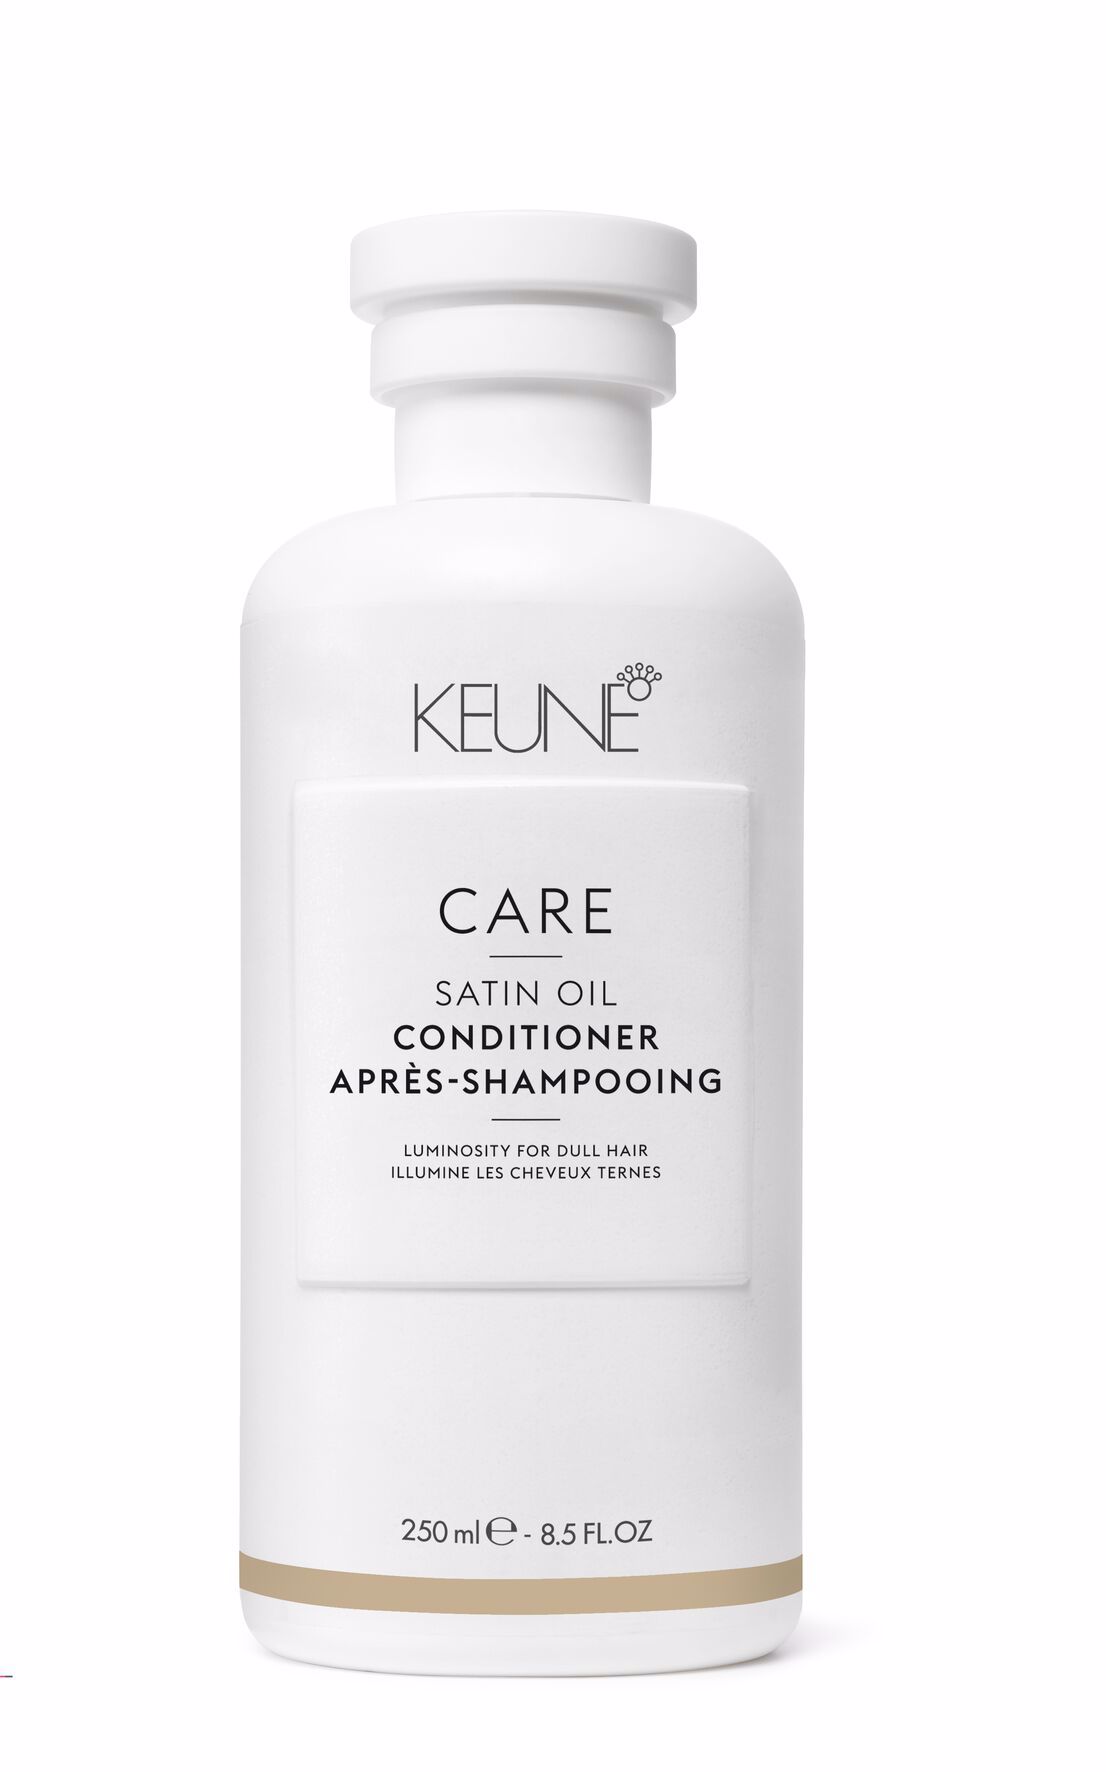 Satin Oil Conditioner is ideal for dull, dry hair. With its innovative, lightweight formula, it leaves your hair fresh, healthy, and shiny. Available on online hair shop keune.ch.